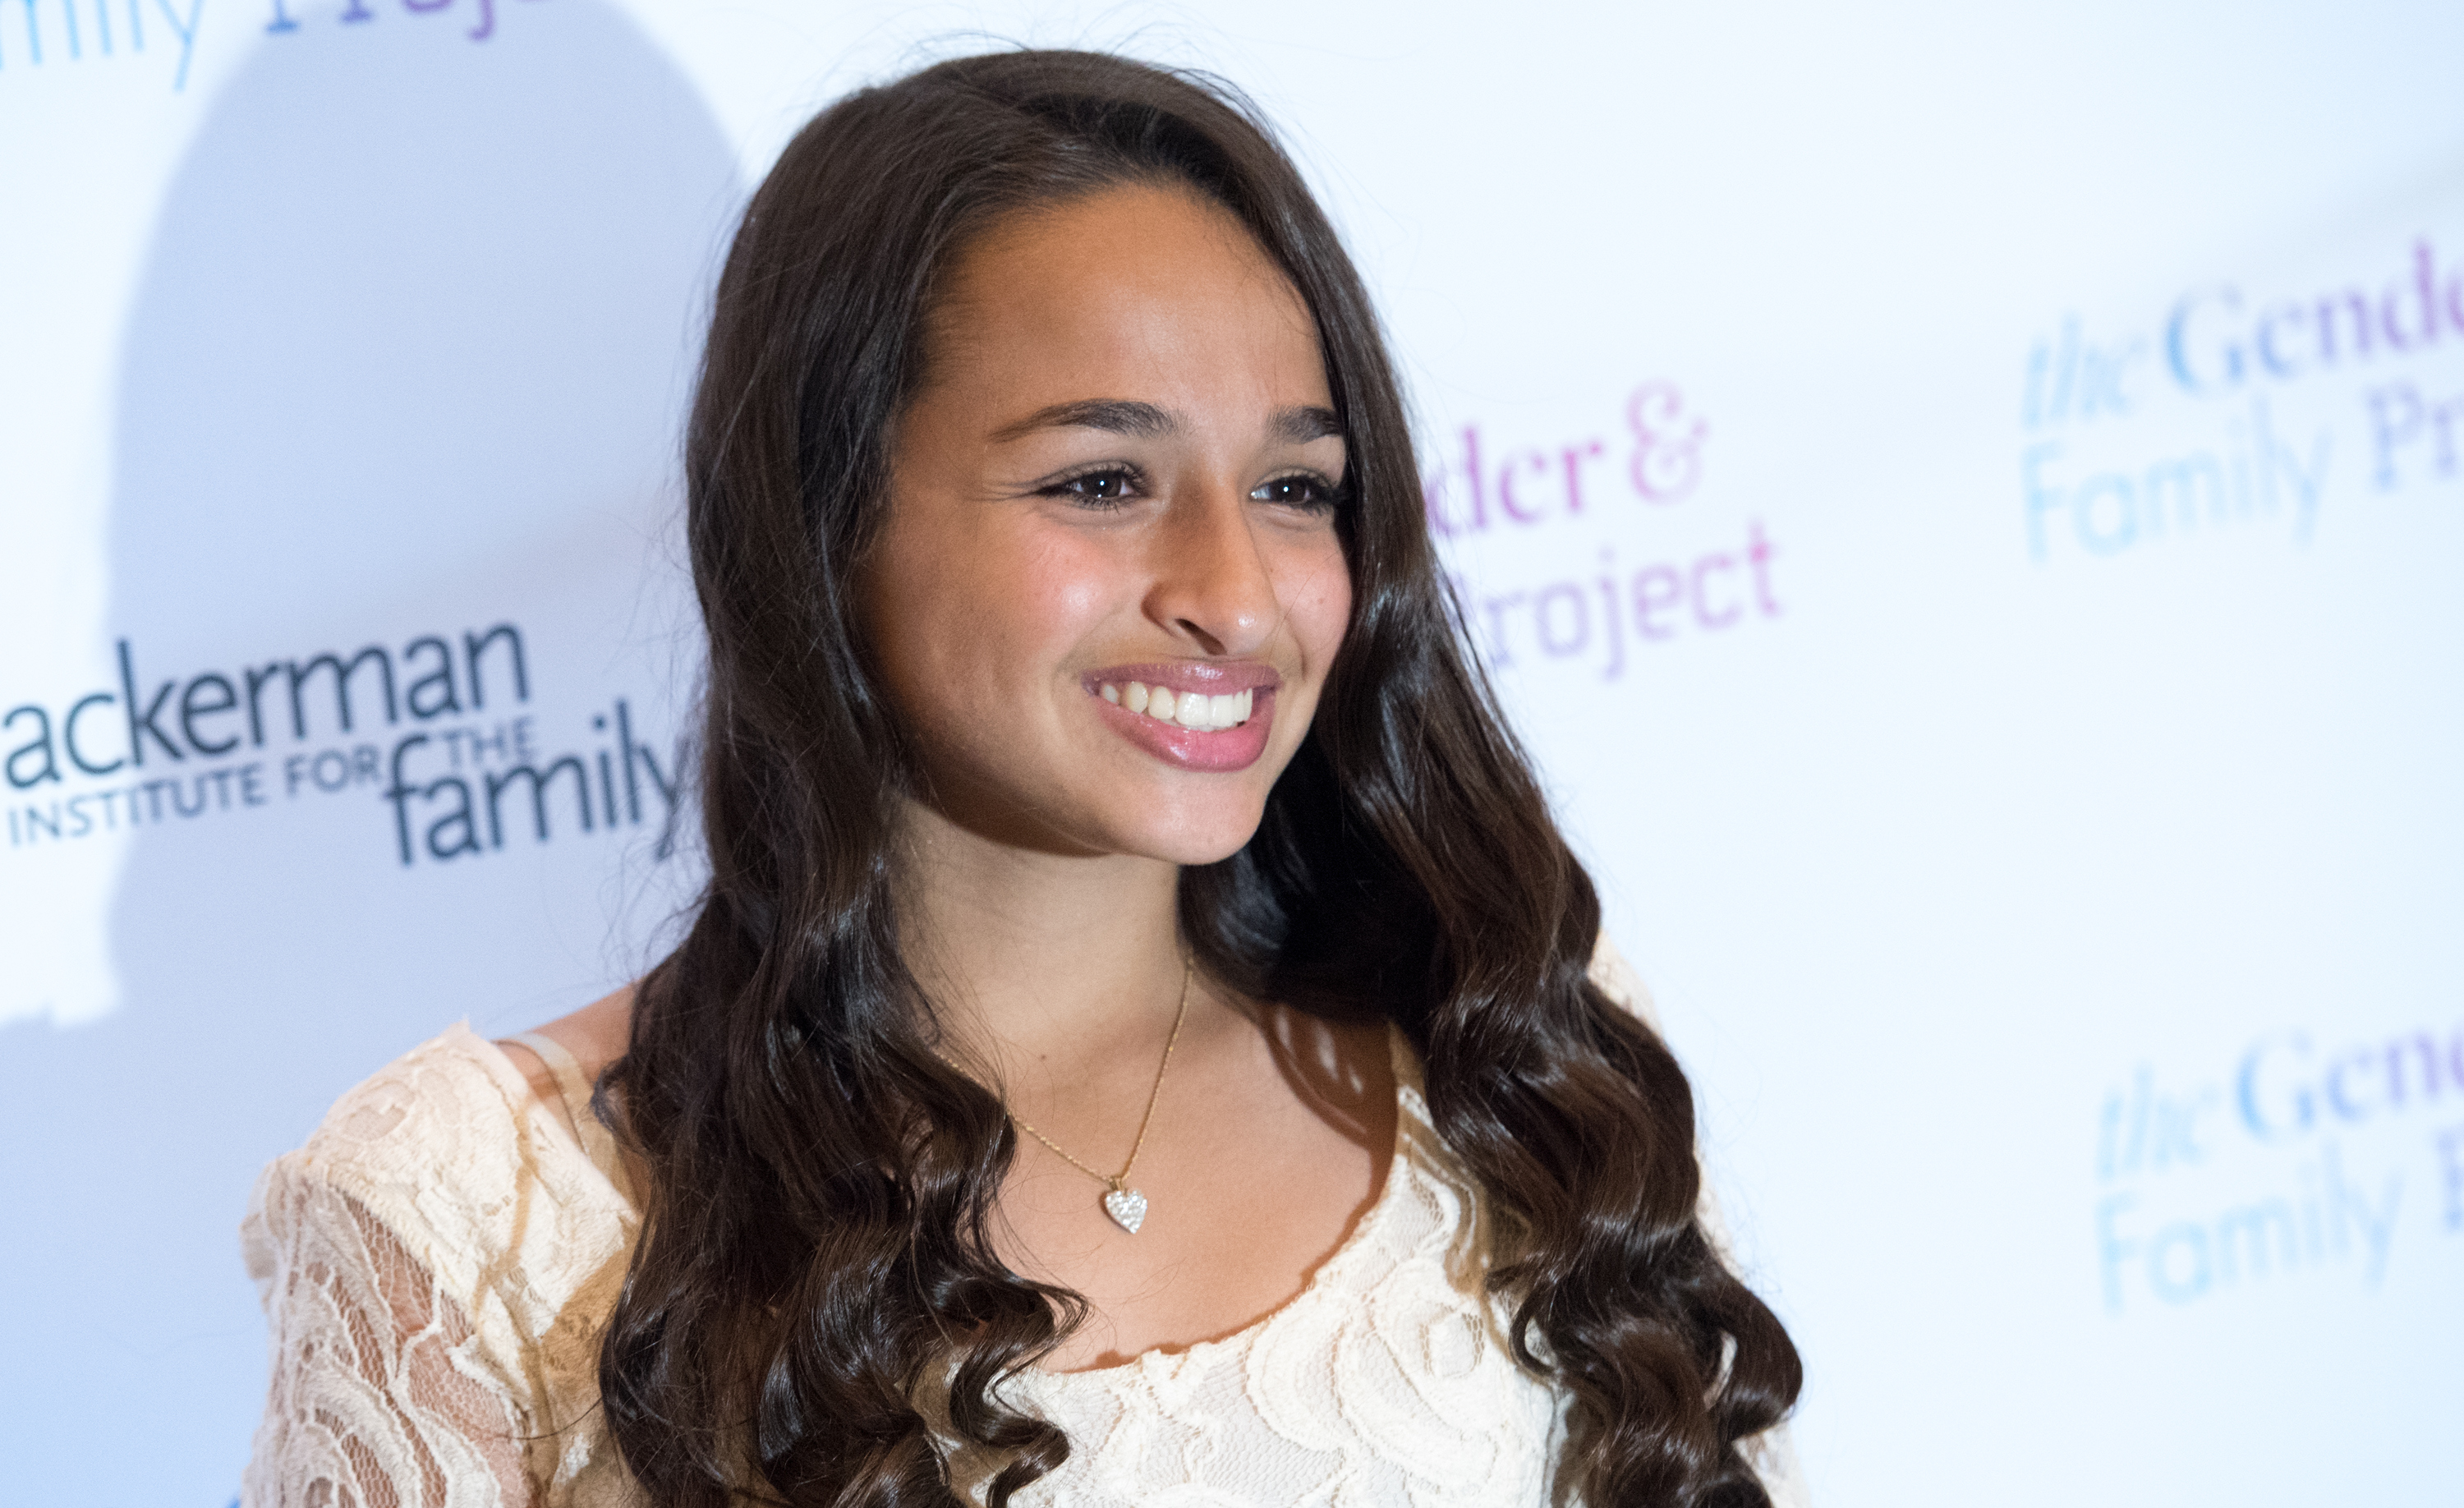 Activist Jazz Jennings in New York City on March 23, 2015. (Noam Galai—Getty Images)